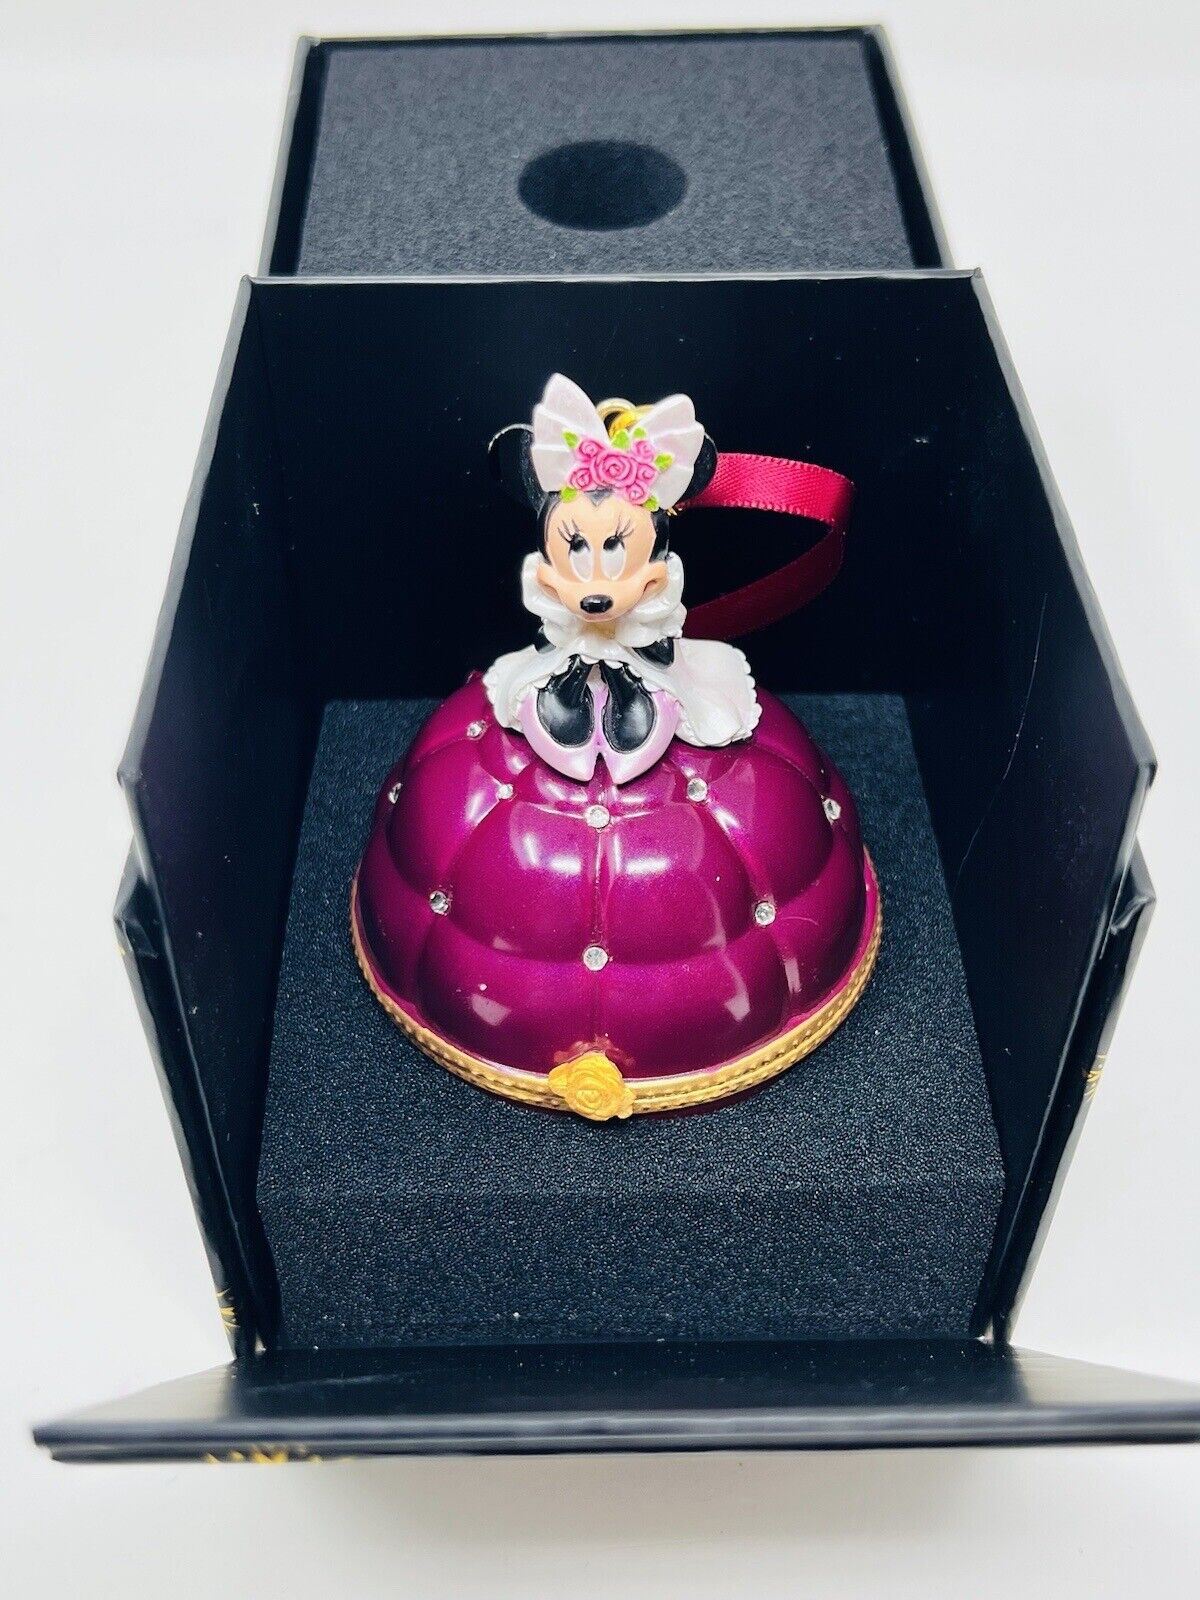 Disney Parks Sketchbook Will You Marry Me Wedding Ring & Christmas Ornament New